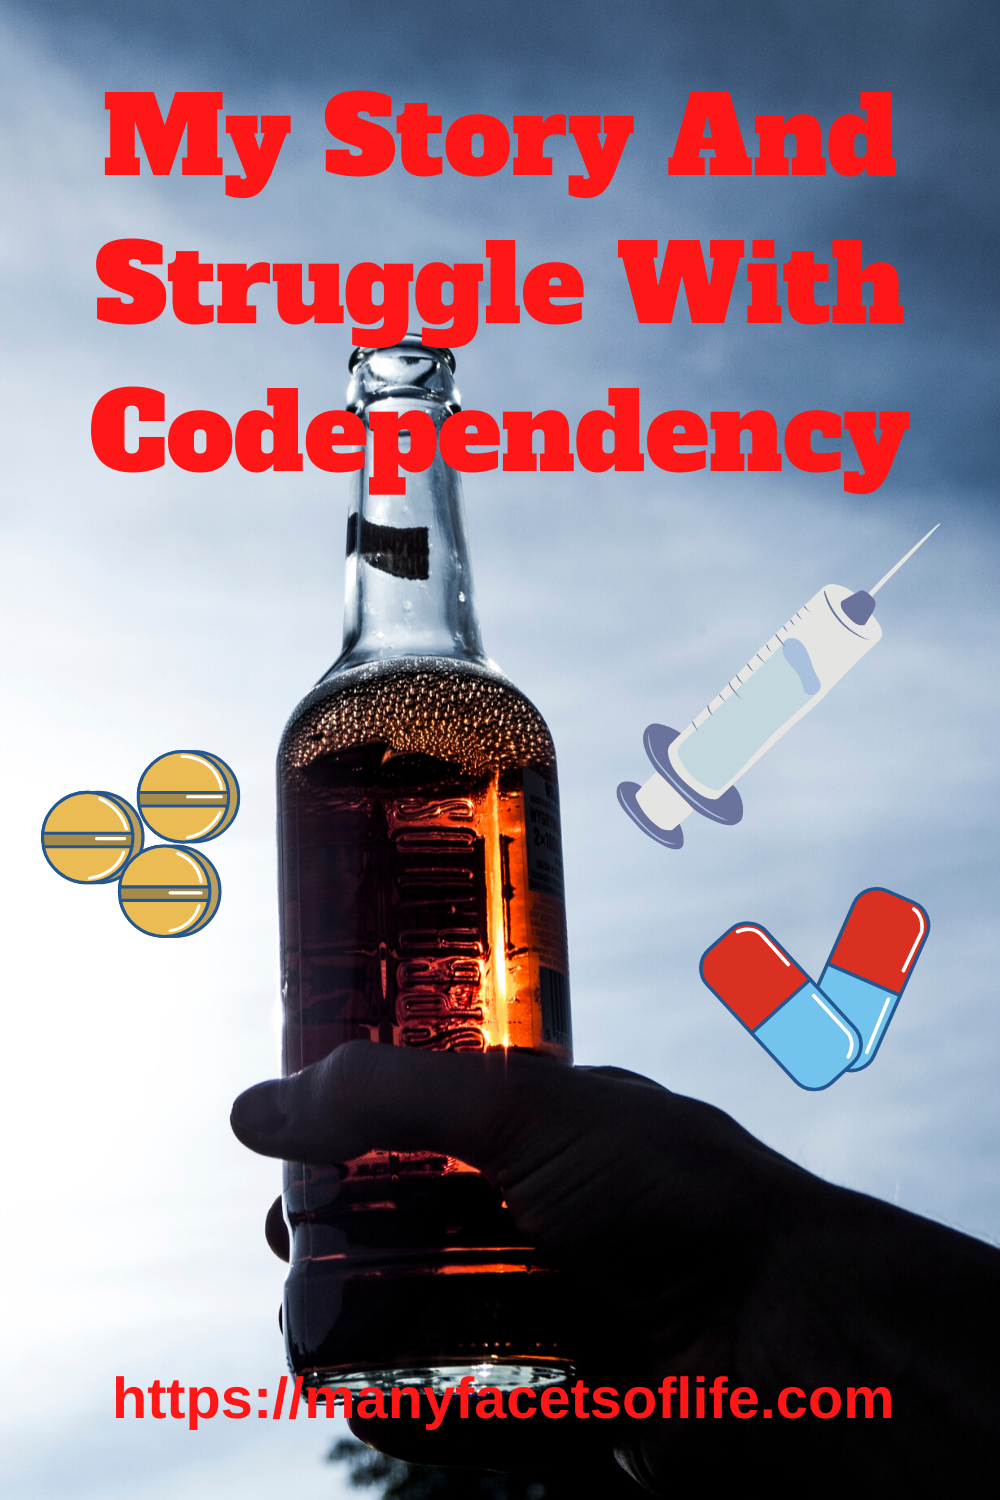 My Story And Struggle With Codependency